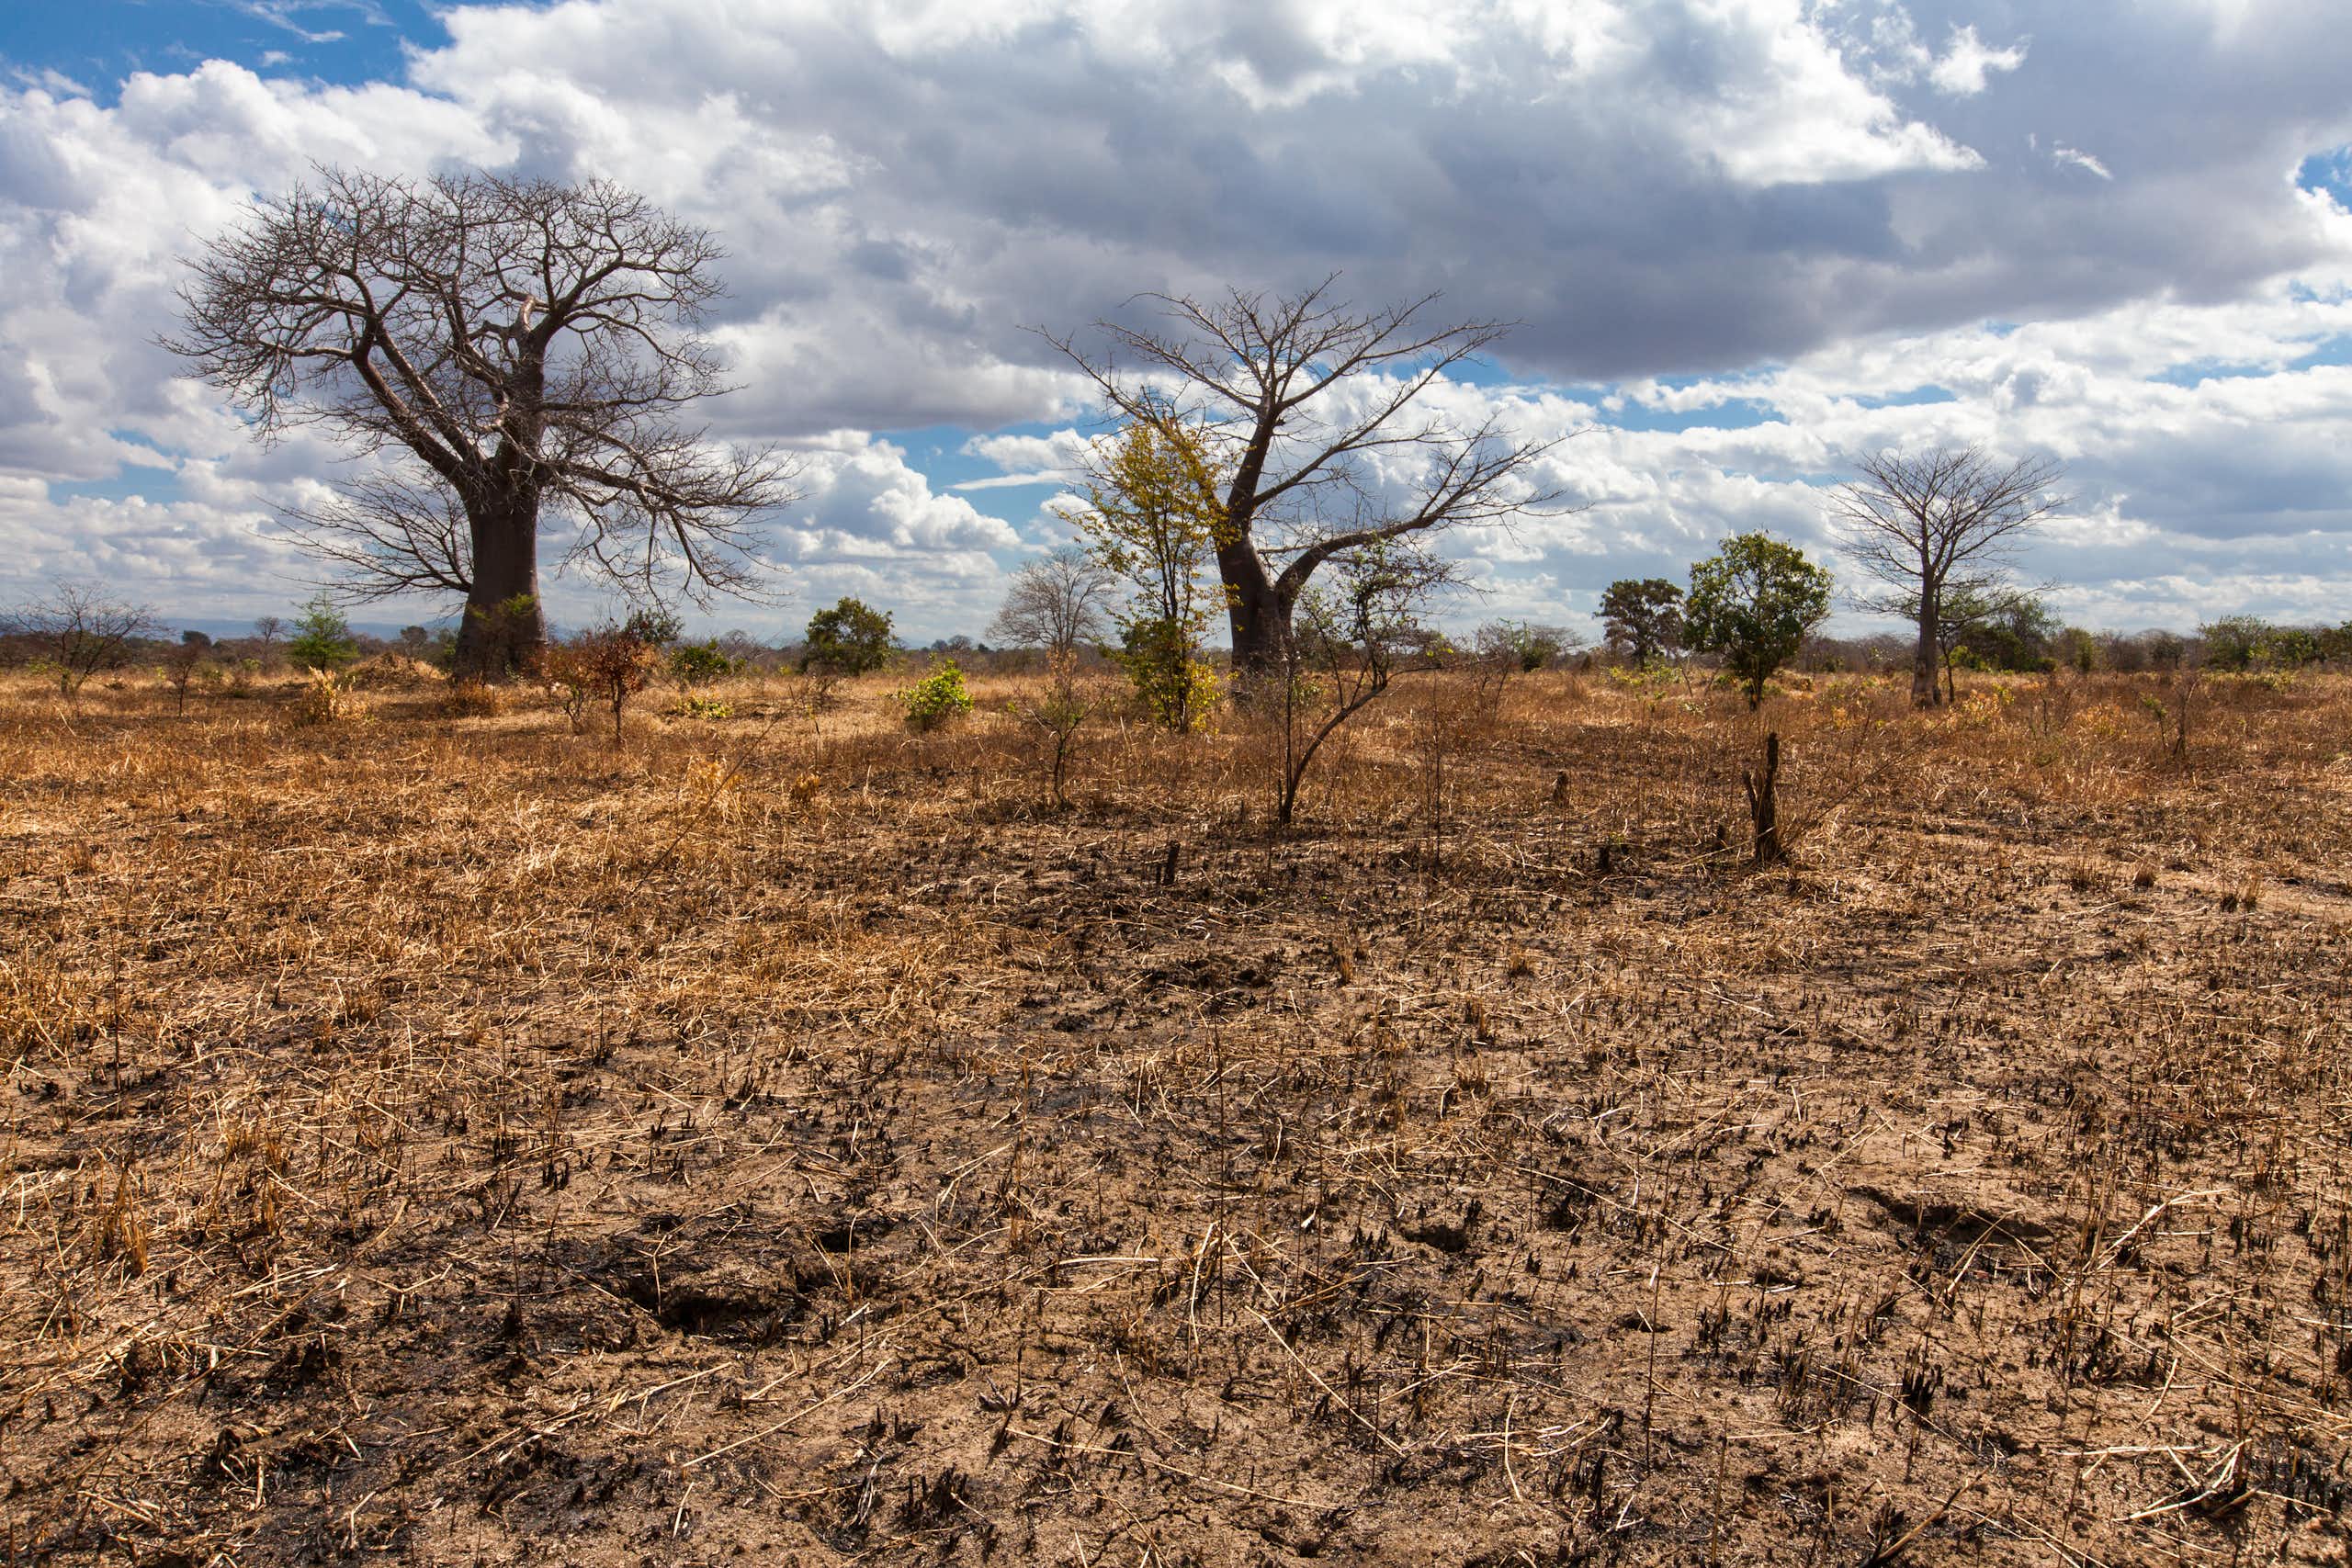 Parched and dried out landscape where even the grass has not survived with a Baobab tree in the background, depicting the effects of drought